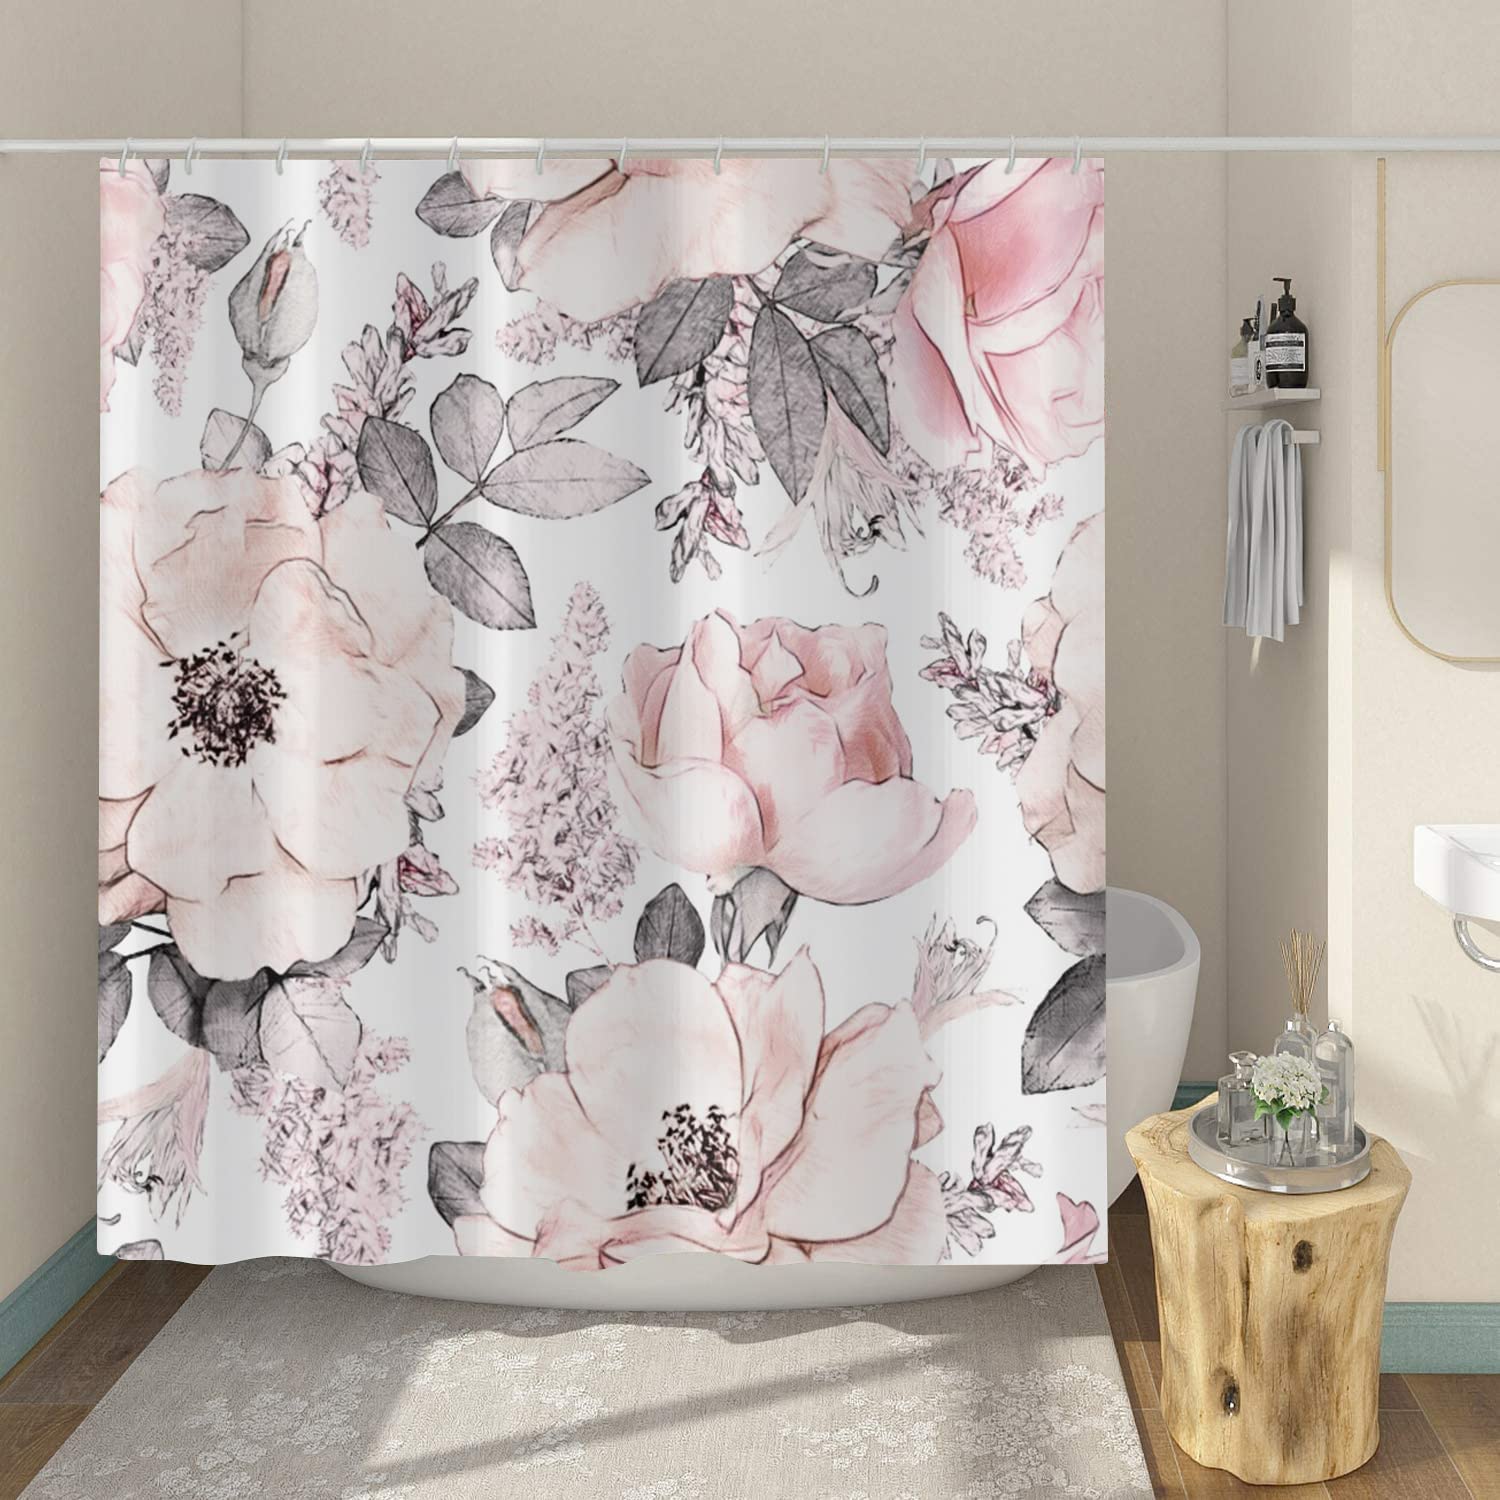 Pink Floral Shower Curtain, Pink and Grey Watercolor Rose Blossom Ink Painting Art Bathroom Curtain for Spring Bathtub Home Decor Waterproof Fabric Machine Washable with 12 Hooks - image 3 of 6